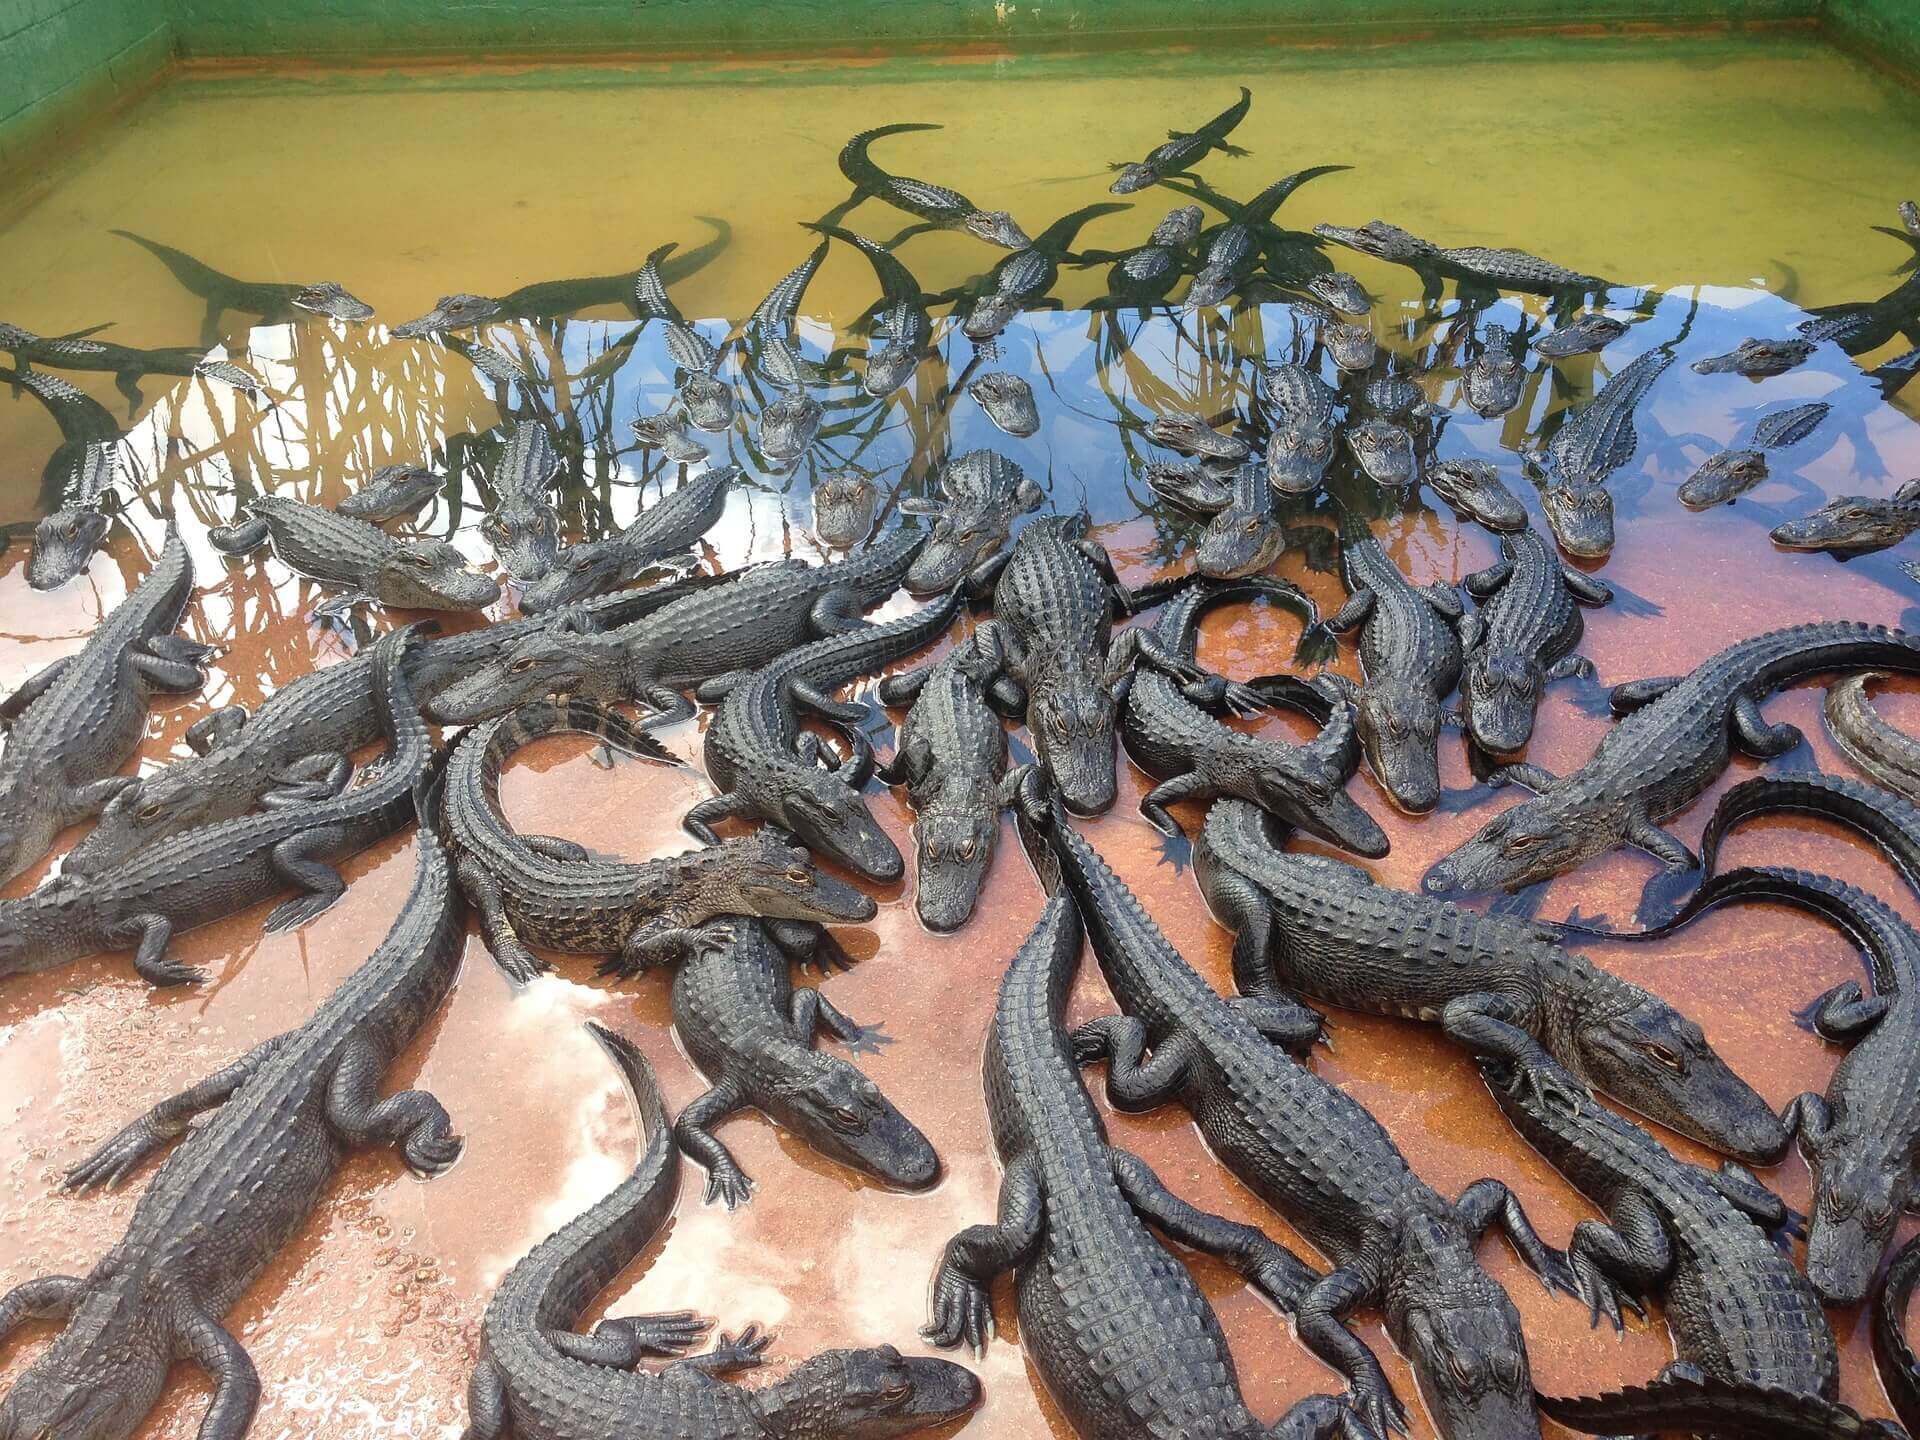 Alligator skin sales banned in California as activists finally defeat  exotic skins industry